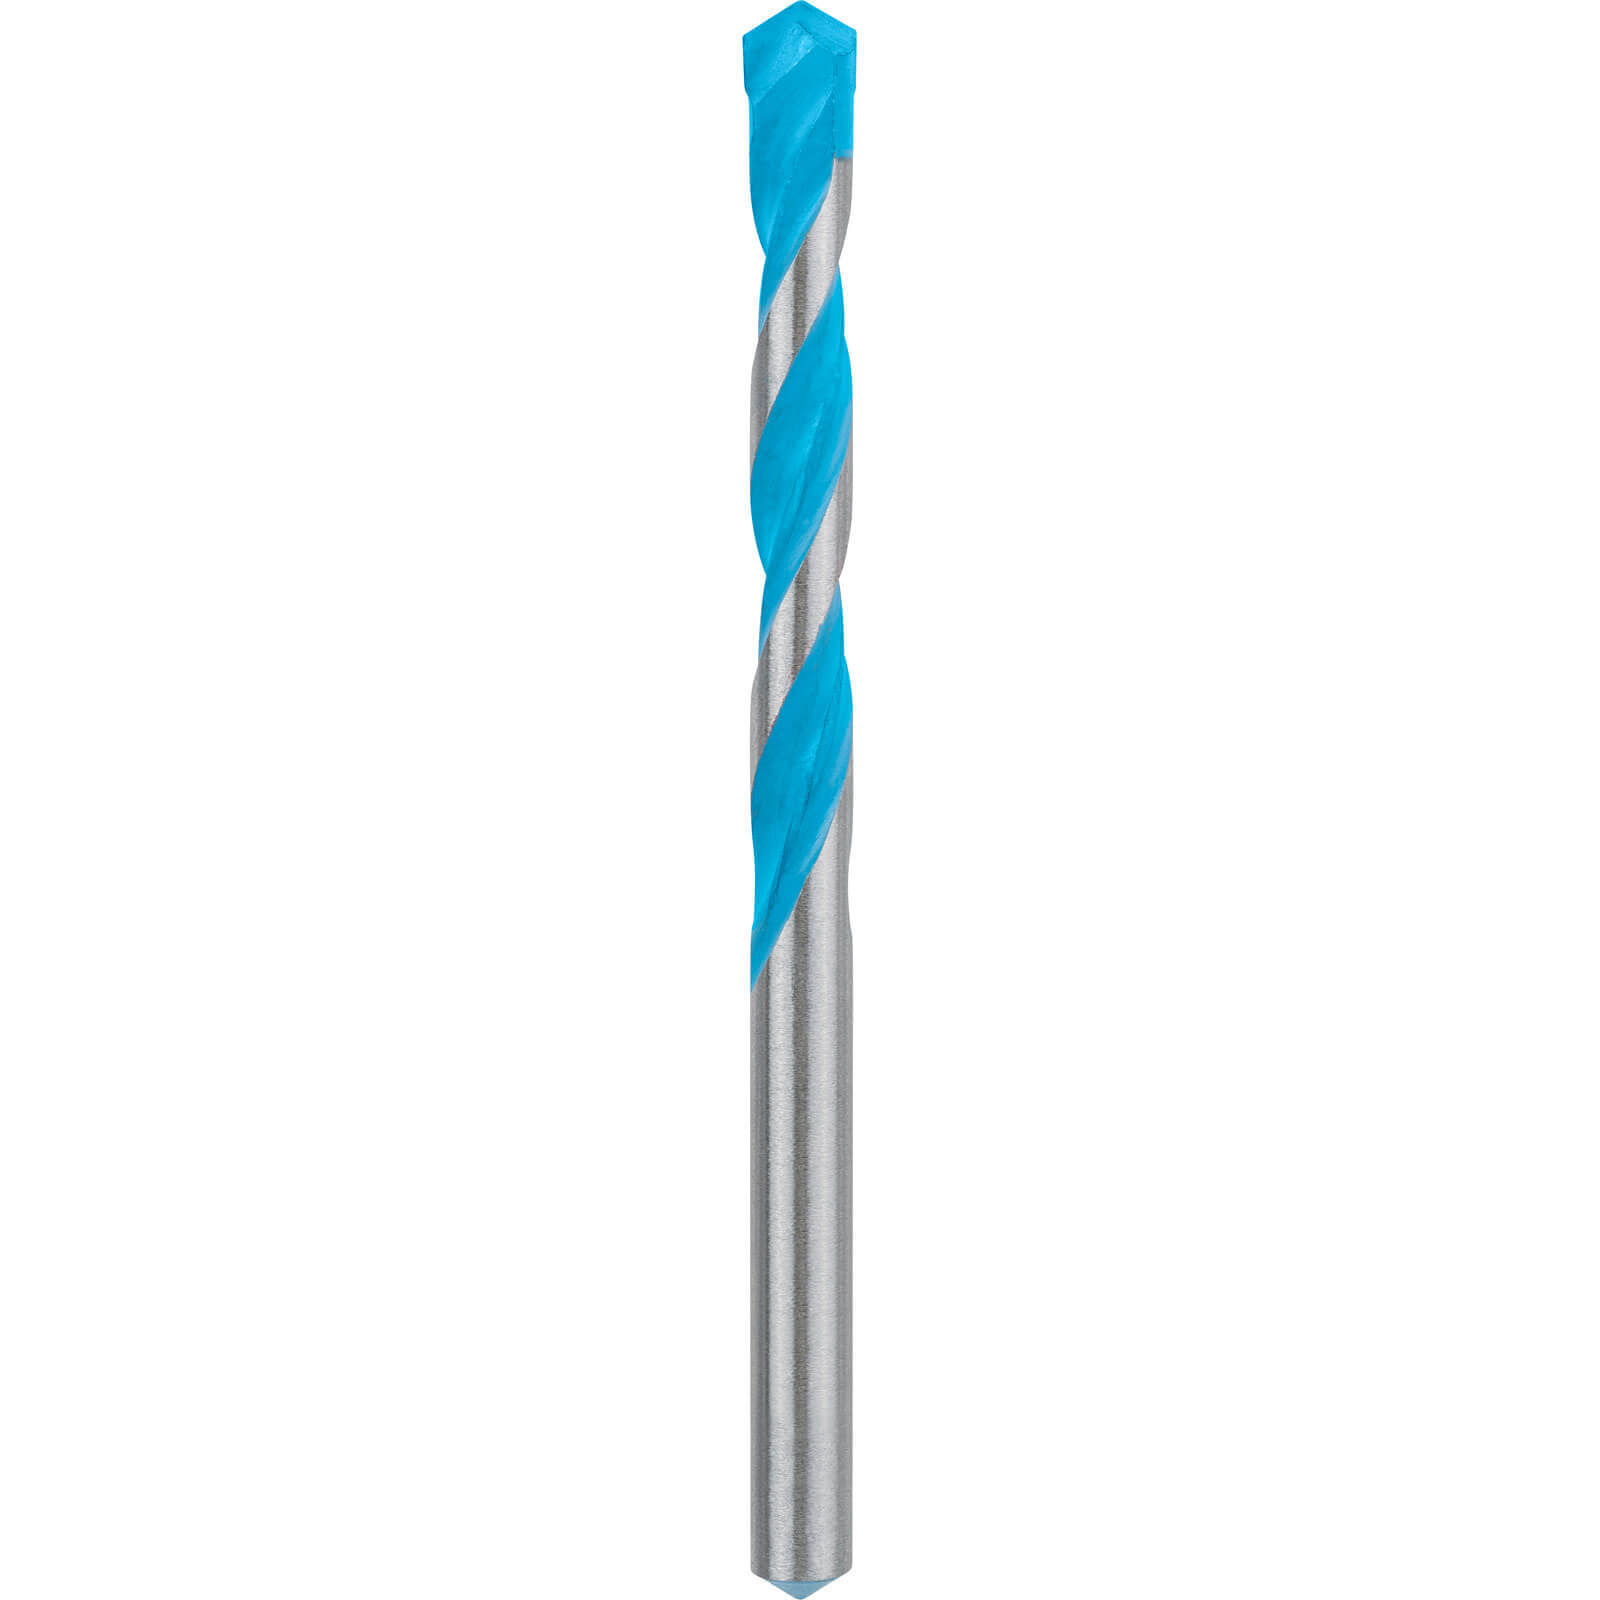 Photo of Bosch Expert Cyl-9 Multi Construction Drill Bit 7mm 100mm Pack Of 10